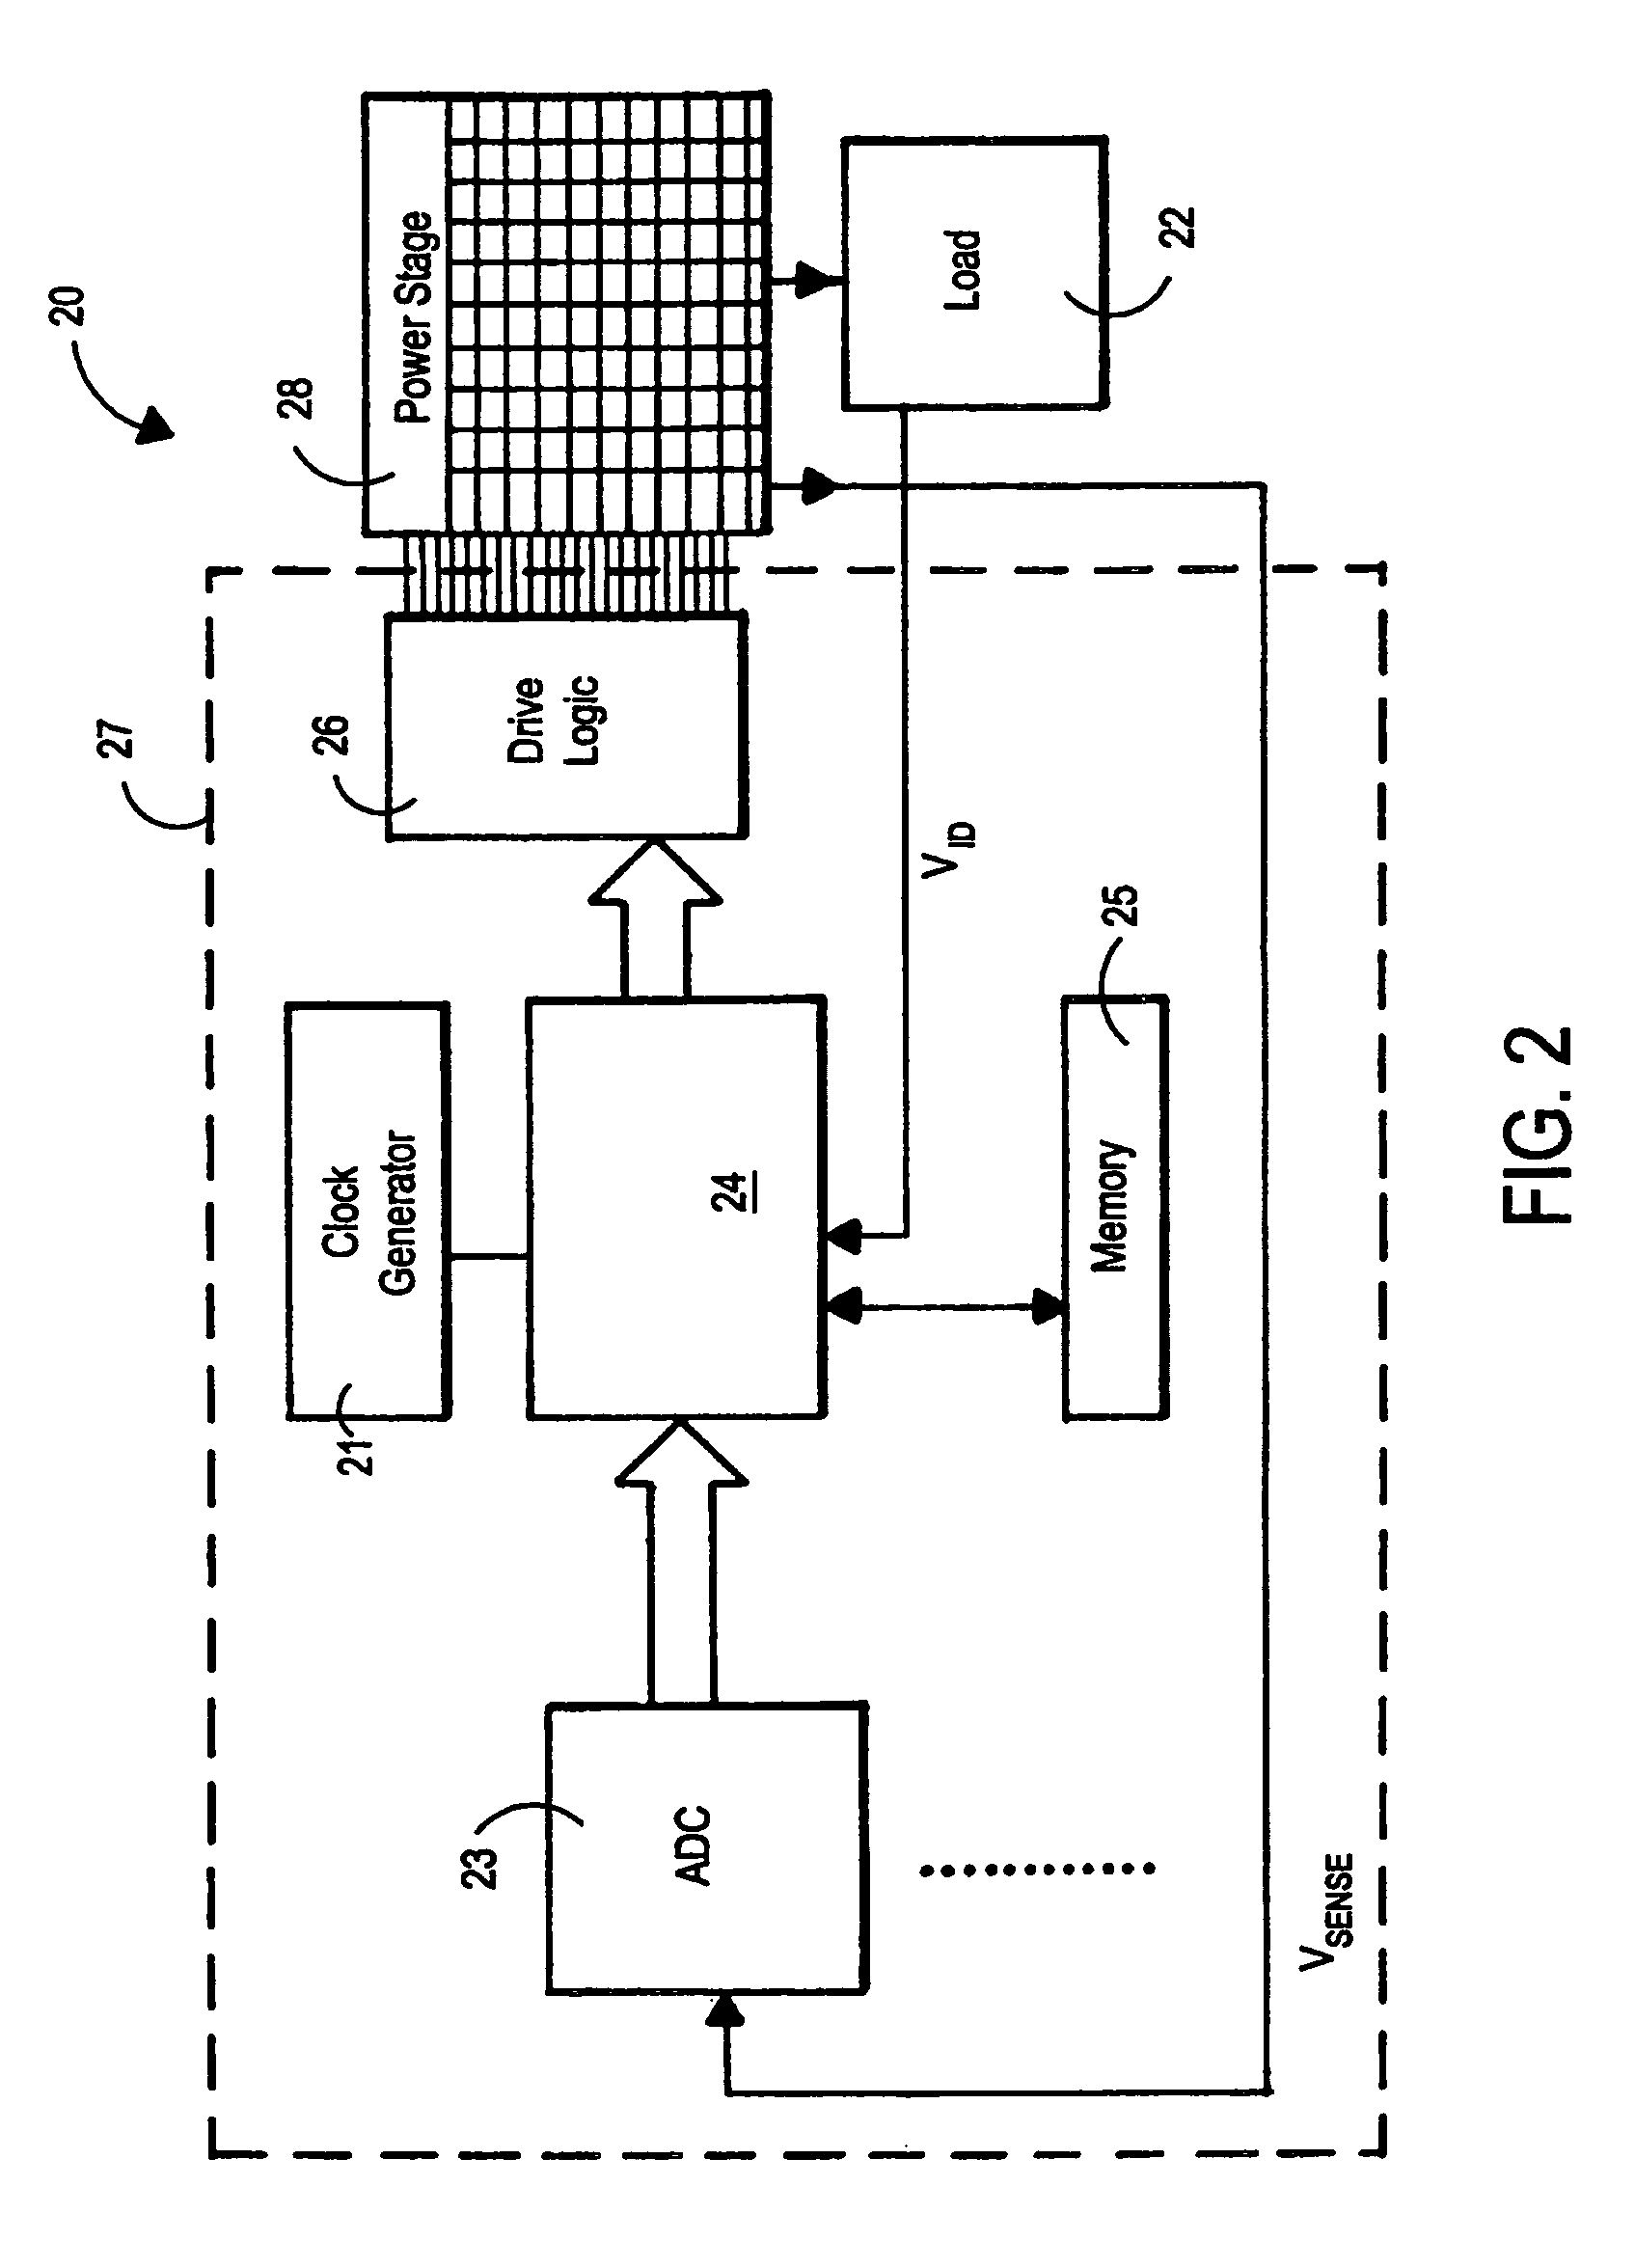 Switched-capacitor power supply system and method